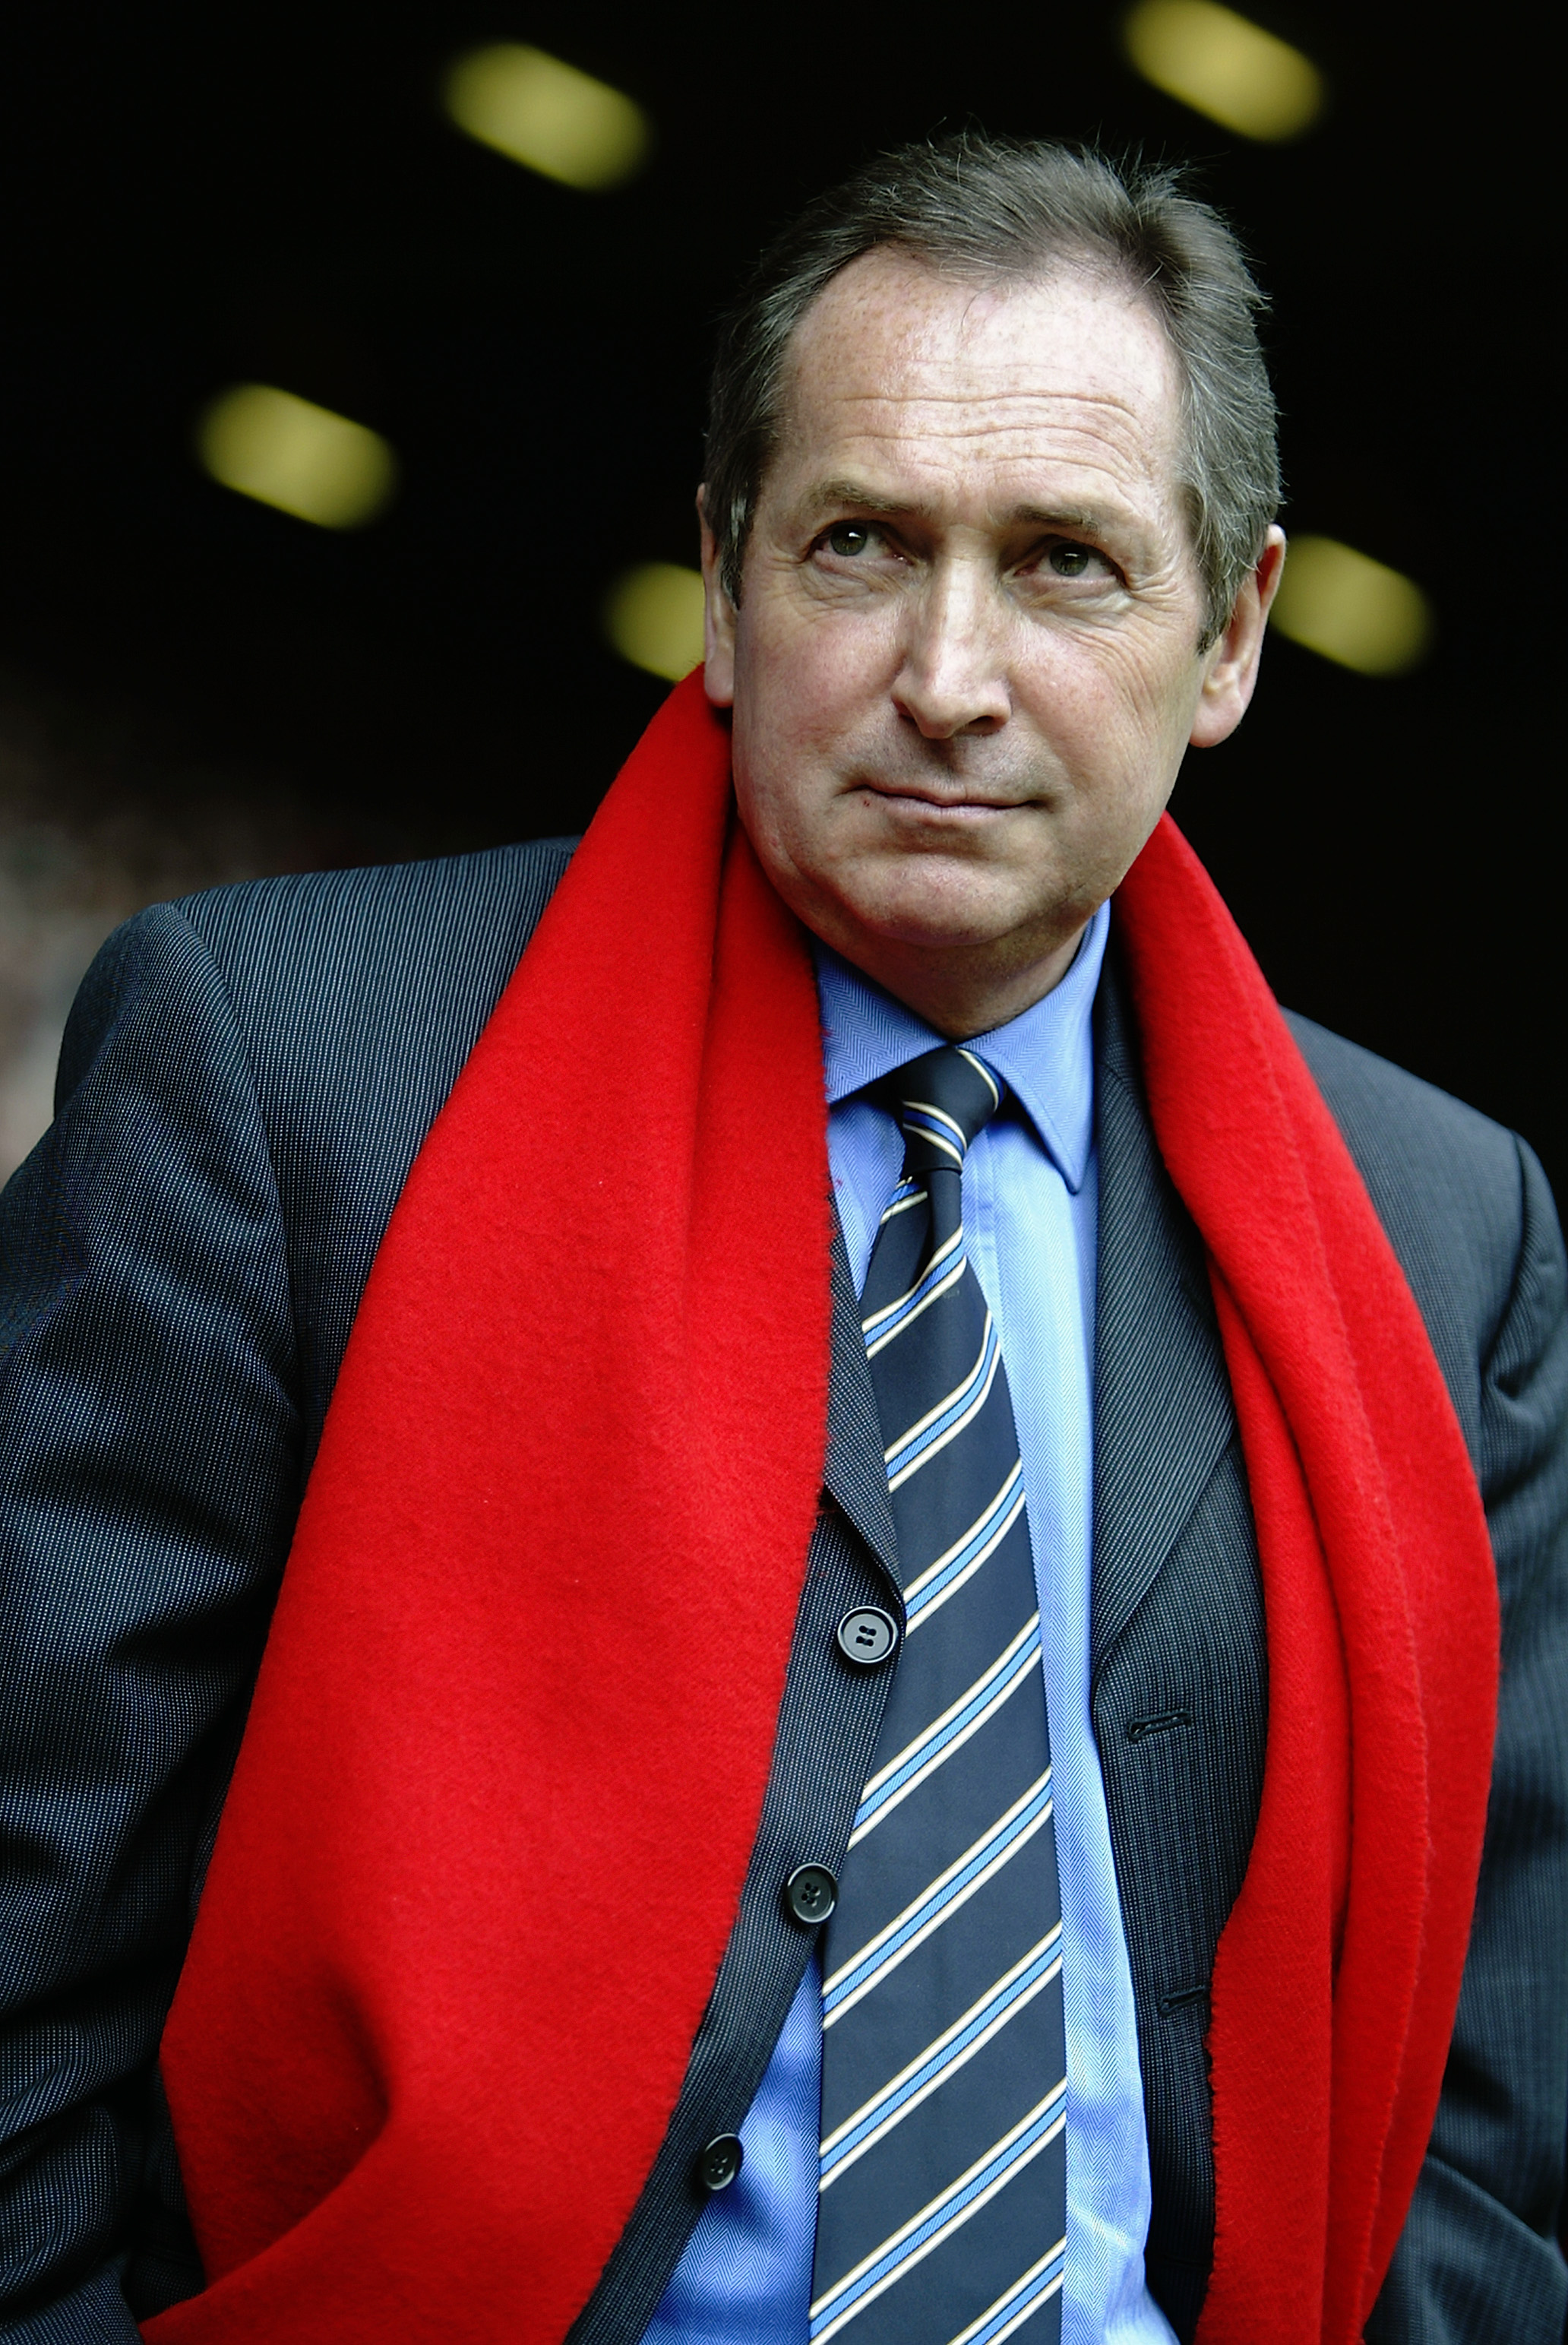 LIVERPOOL - APRIL 12:  Liverpool manager Gerard Houllier looks on from the touchline during the FA Barclaycard Premiership match between Liverpool and Fulham on April 12, 2003 at Anfield in Liverpool, England.  Liverpool won the match 2-0.  (Photo by Mark